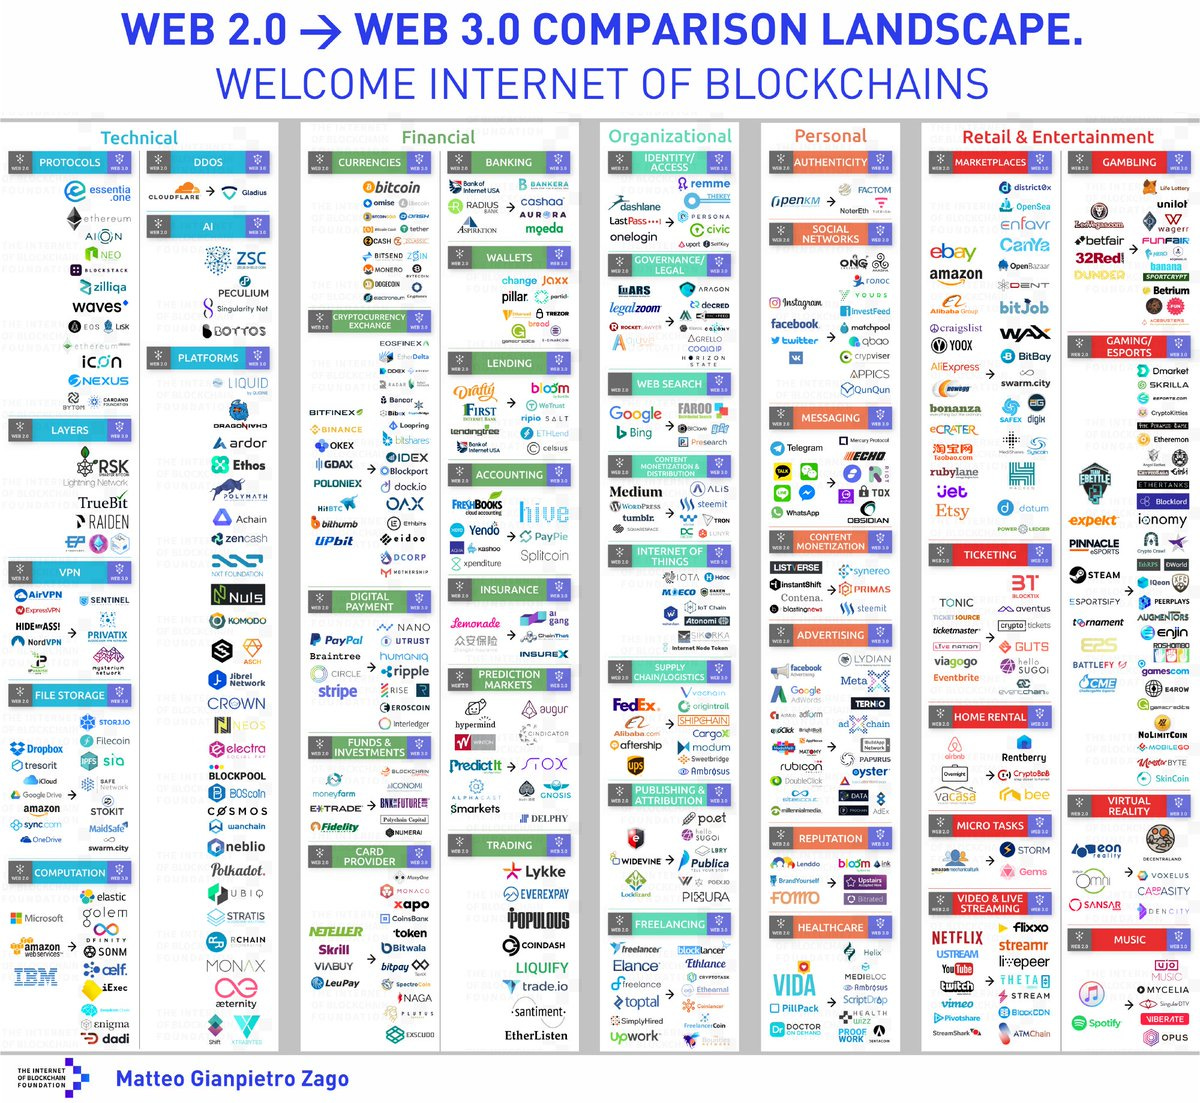 Ashley Carty on Twitter: "Snapshot of the blockchain ecosystem and the Web  2.0 companies that are being disrupted.… "